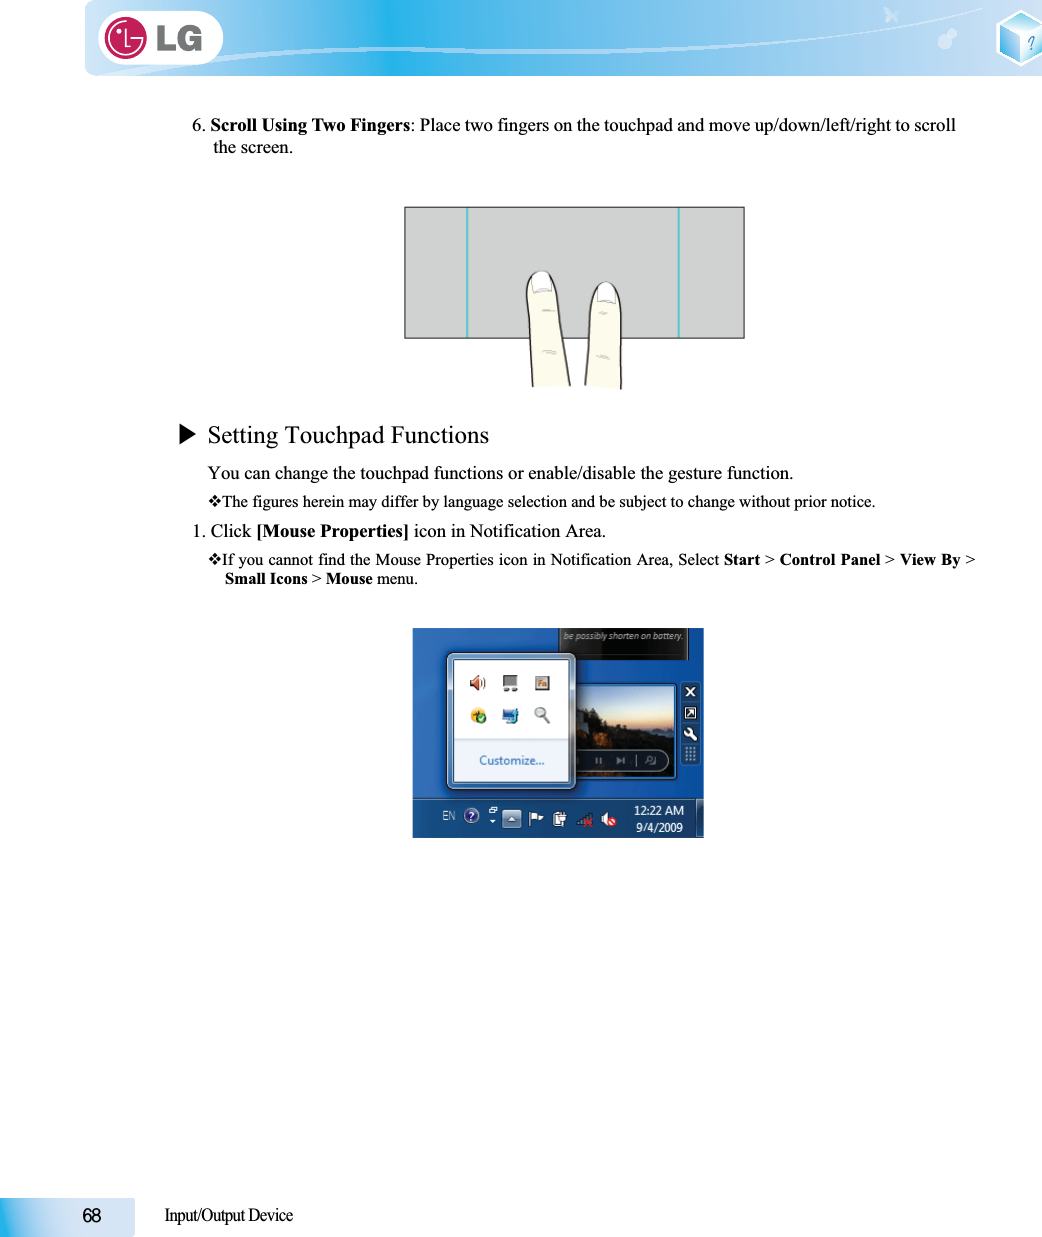 Input/Output Device6. Scroll Using Two Fingers: Place two fingers on the touchpad and move up/down/left/right to scroll the screen.XSetting Touchpad FunctionsYou can change the touchpad functions or enable/disable the gesture function.The figures herein may differ by language selection and be subject to change without prior notice.1. Click [Mouse Properties] icon in Notification Area.If you cannot find the Mouse Properties icon in Notification Area, Select Start &gt; Control Panel &gt; View By &gt;Small Icons &gt; Mouse menu.